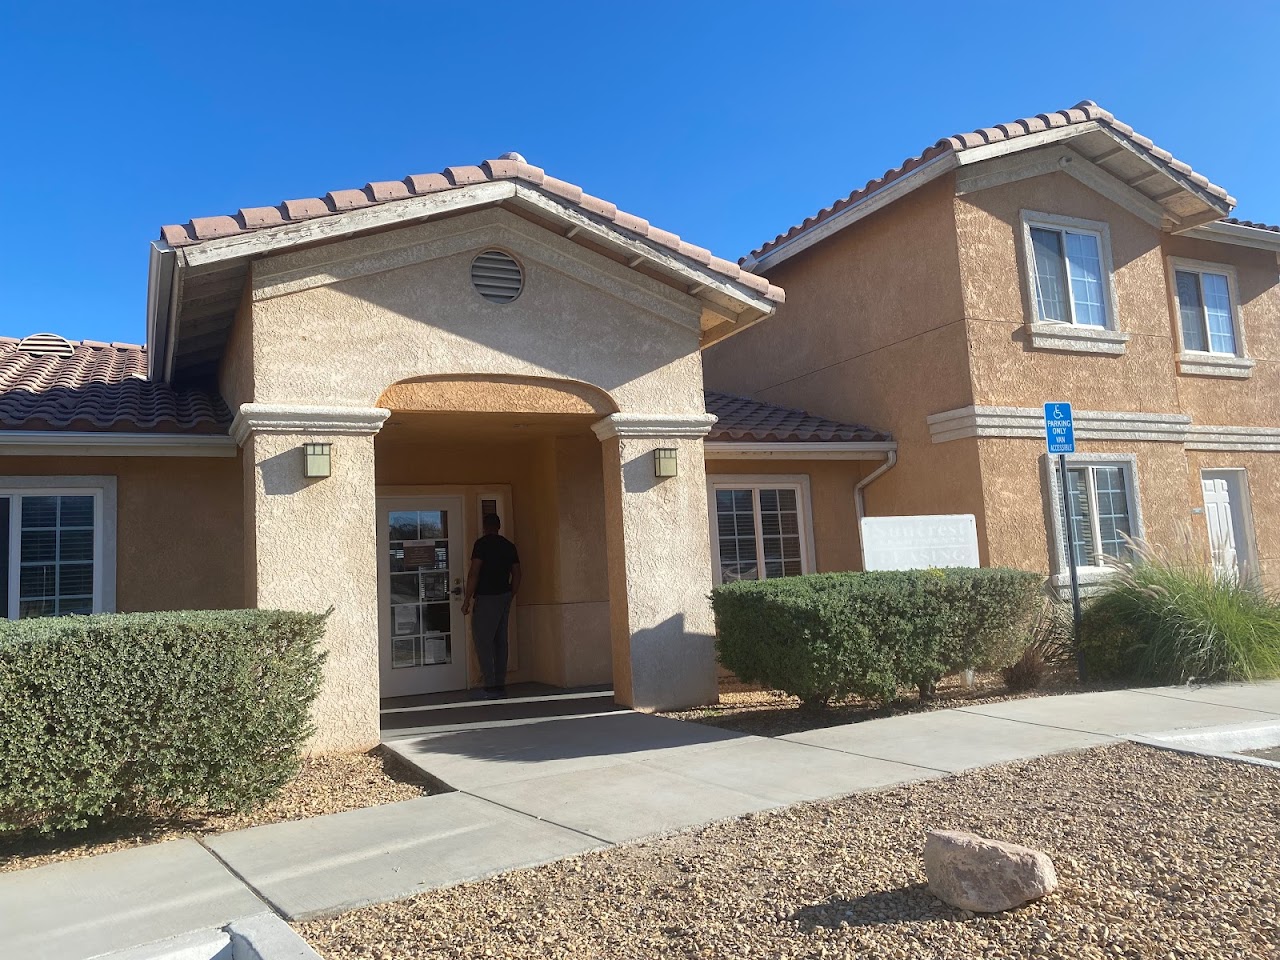 Photo of SUNCREST APTS at 201 N YUCCA AVE BARSTOW, CA 92311